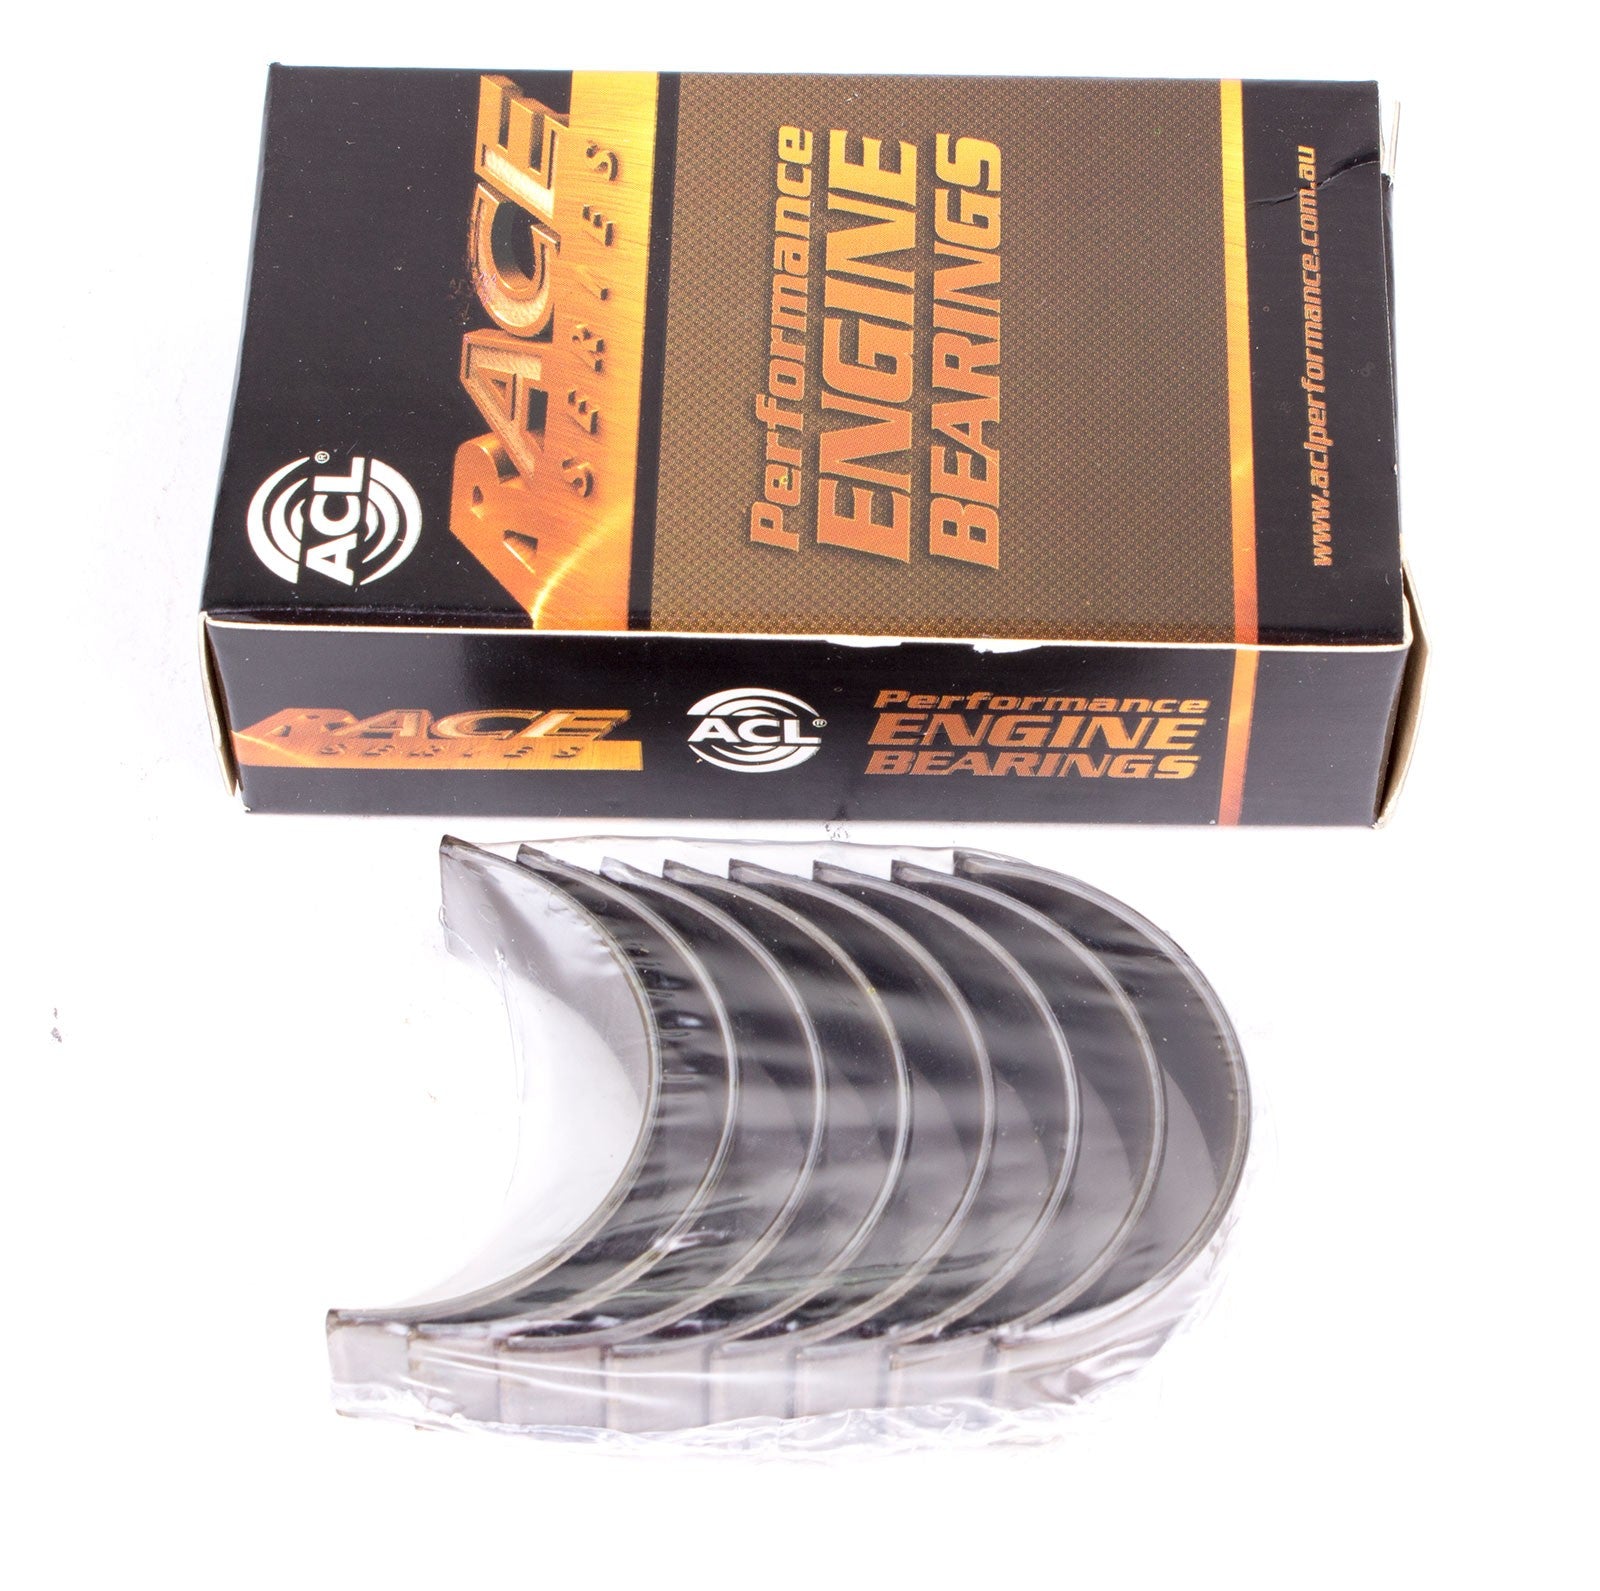 ACL 6M5563H-.25 Main bearing set (ACL Race Series) Photo-0 